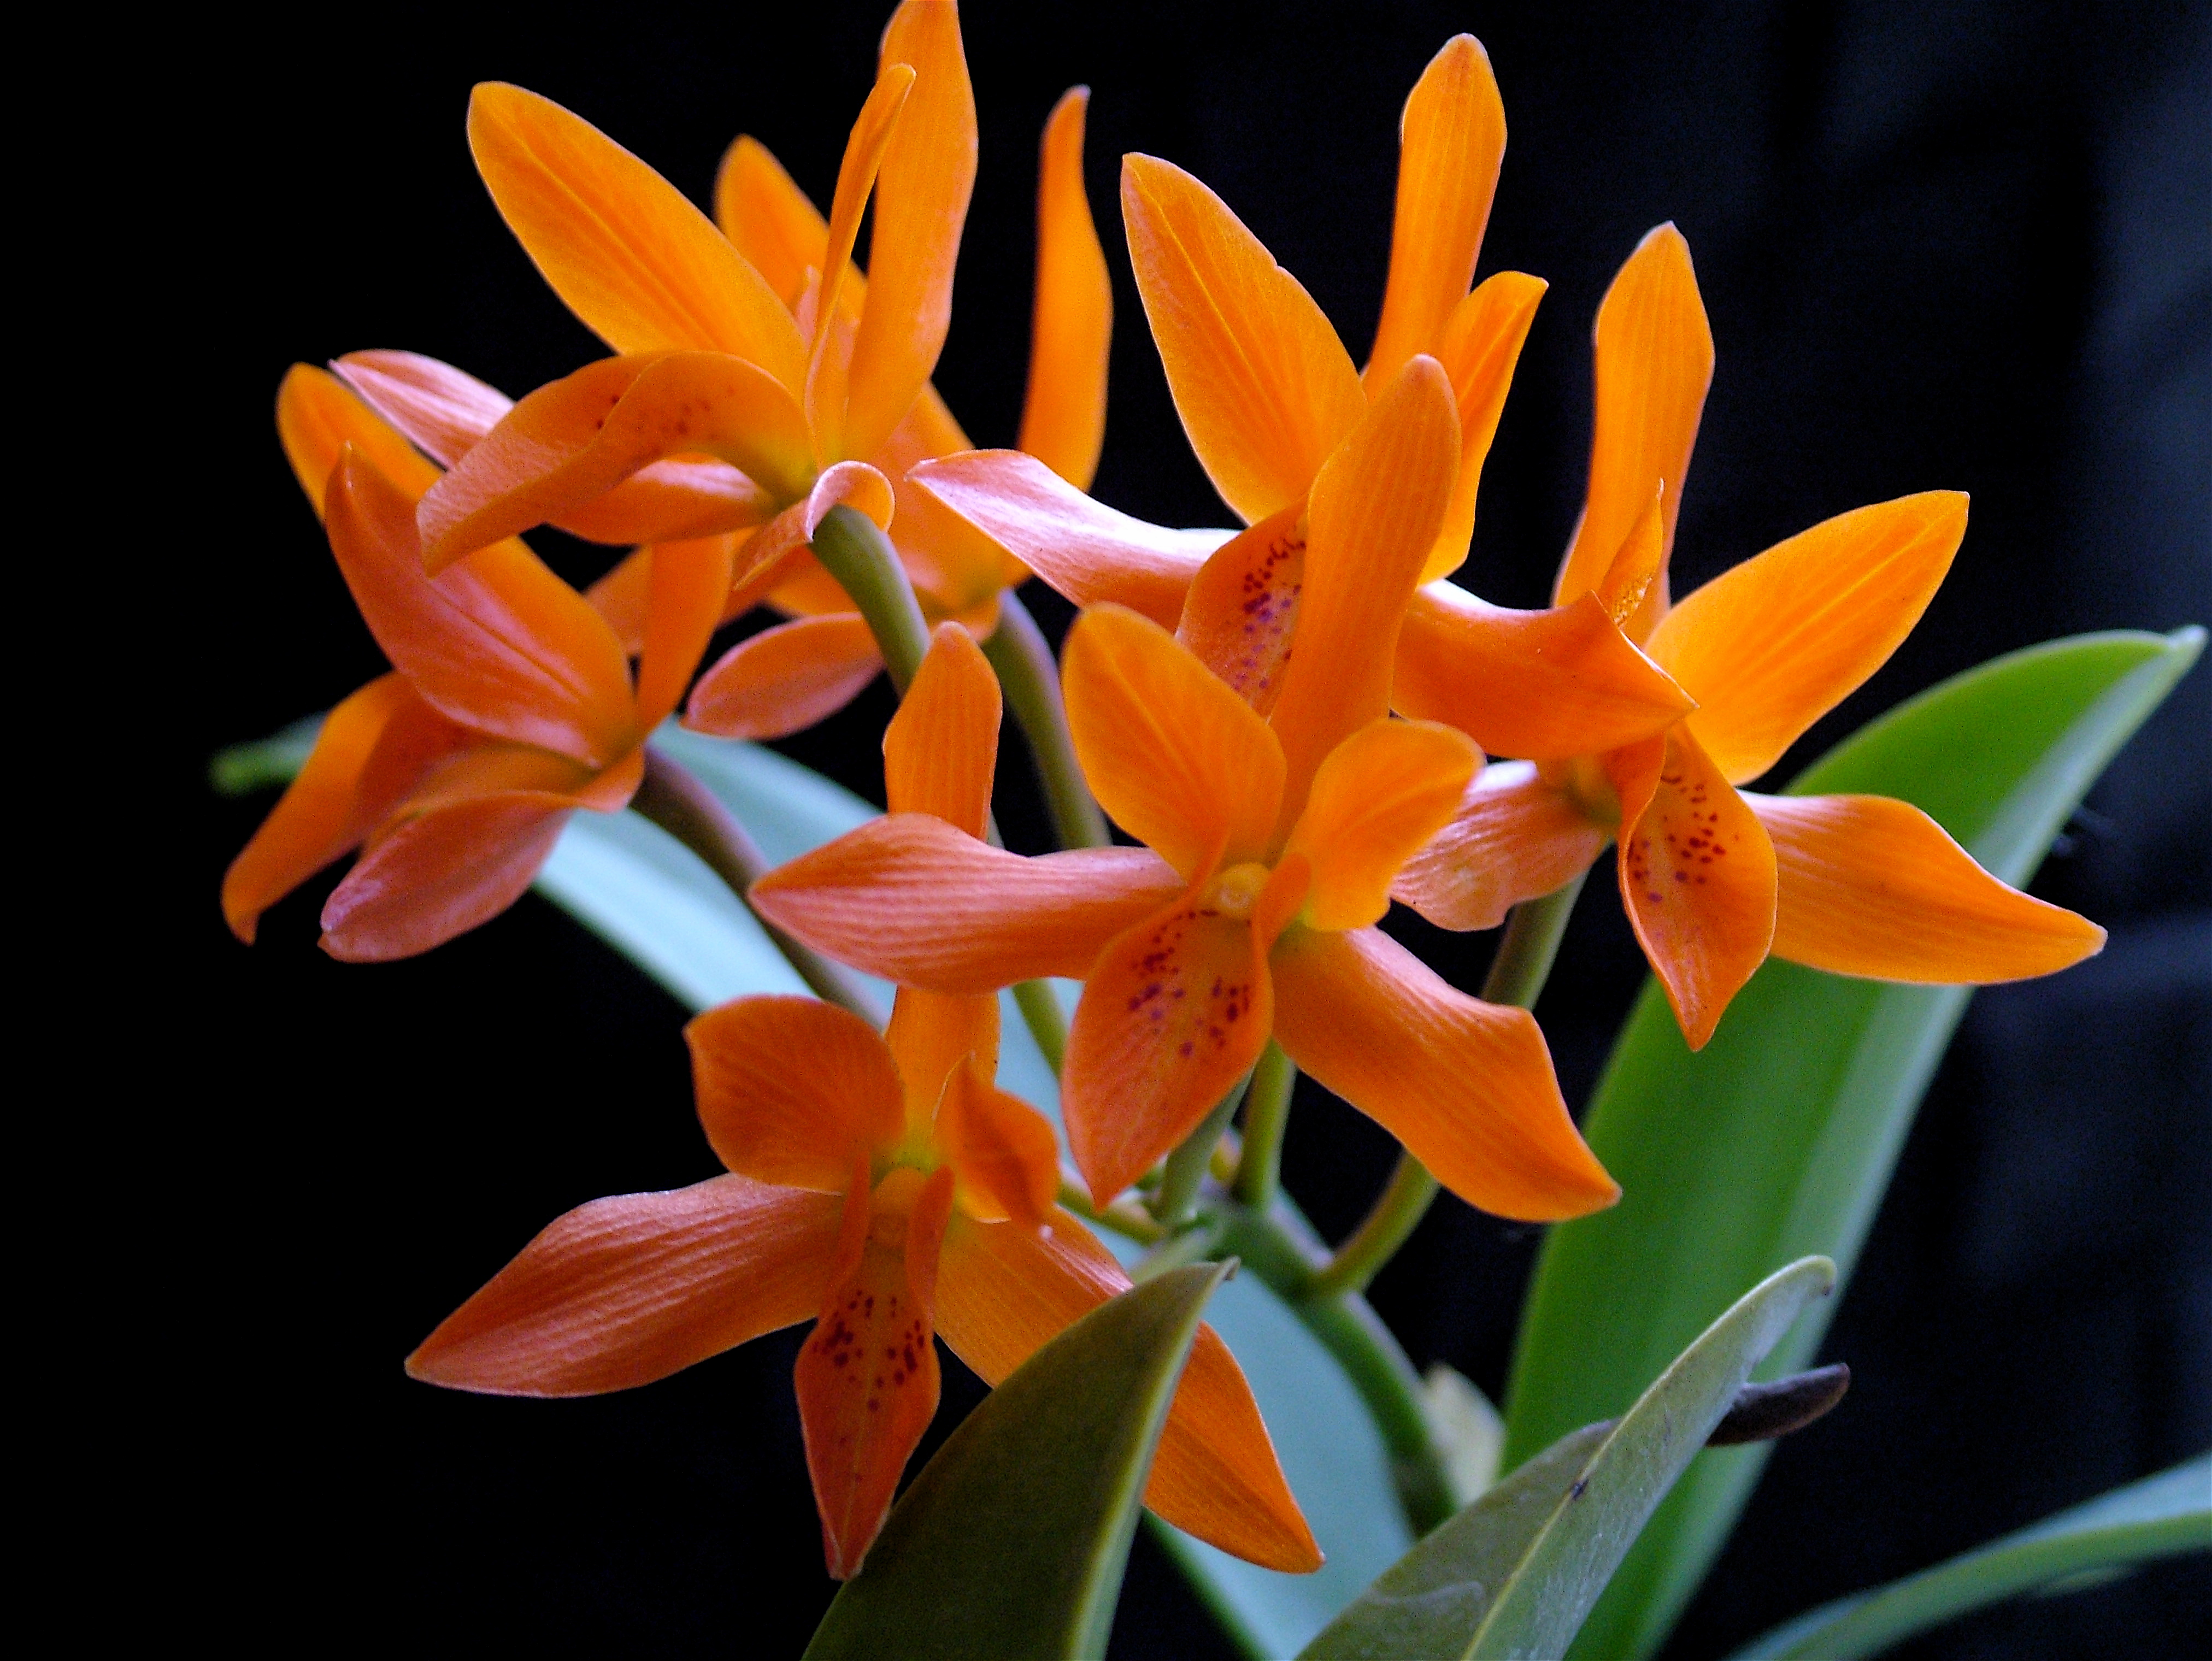 Vibrant orange orchid flower in a natural setting